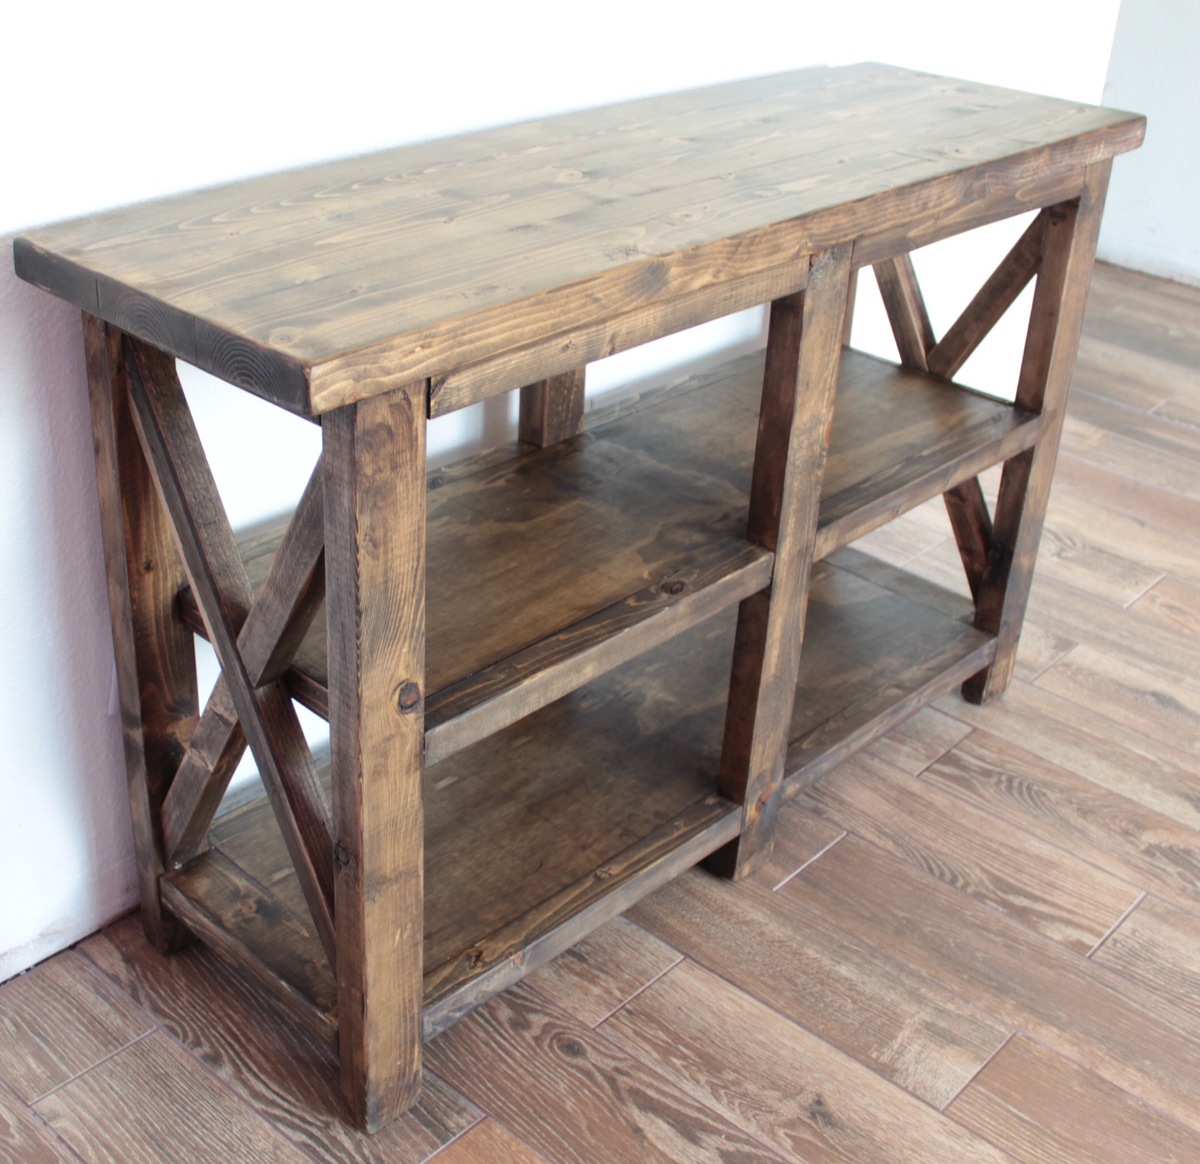 Rustic Entryway Table Ana White